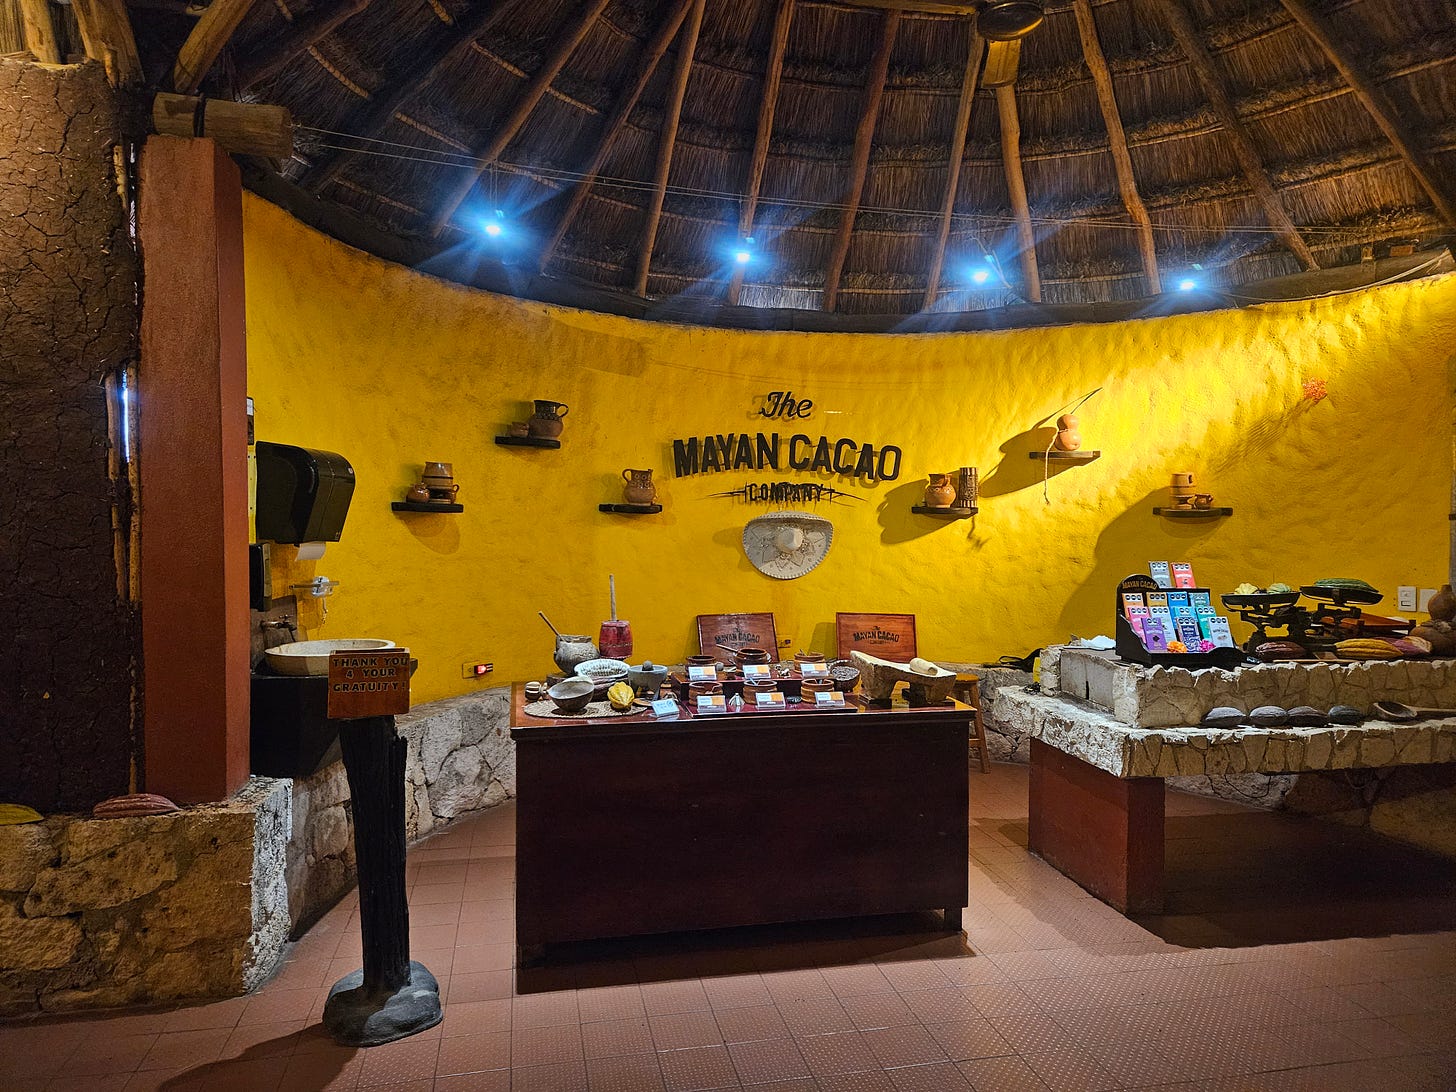 A chocolate demonstration at the Mayan Cacao company